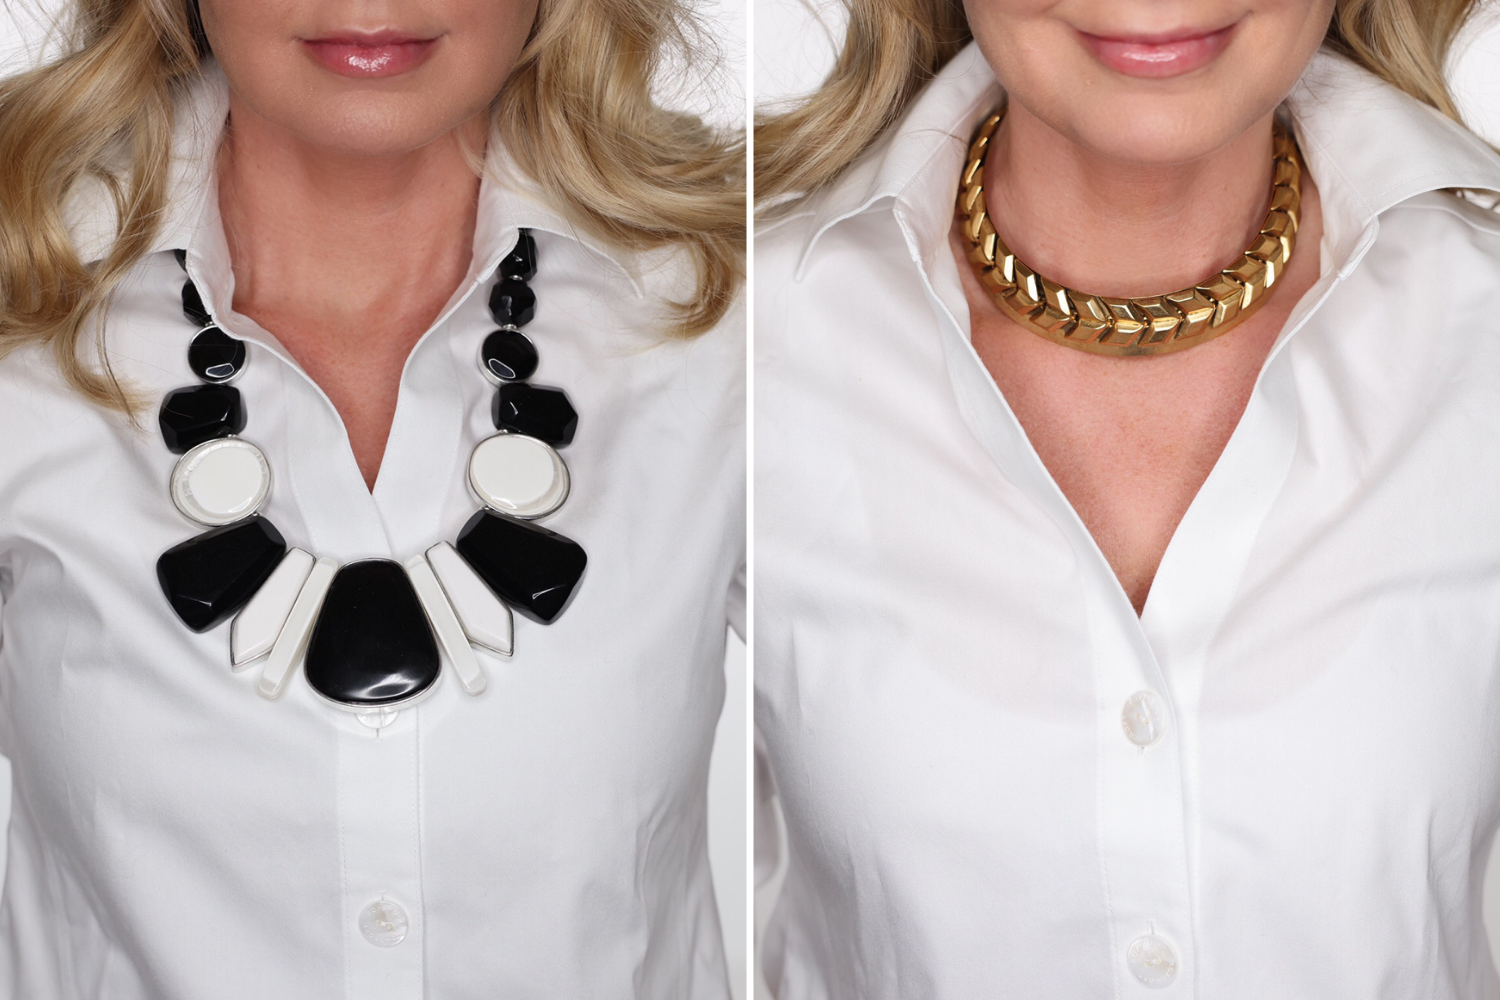 How To Look Younger, Erin Busbee of Busbee in a before and after wearing a black and white bold necklace on the left and a chic gold collar necklace on the right